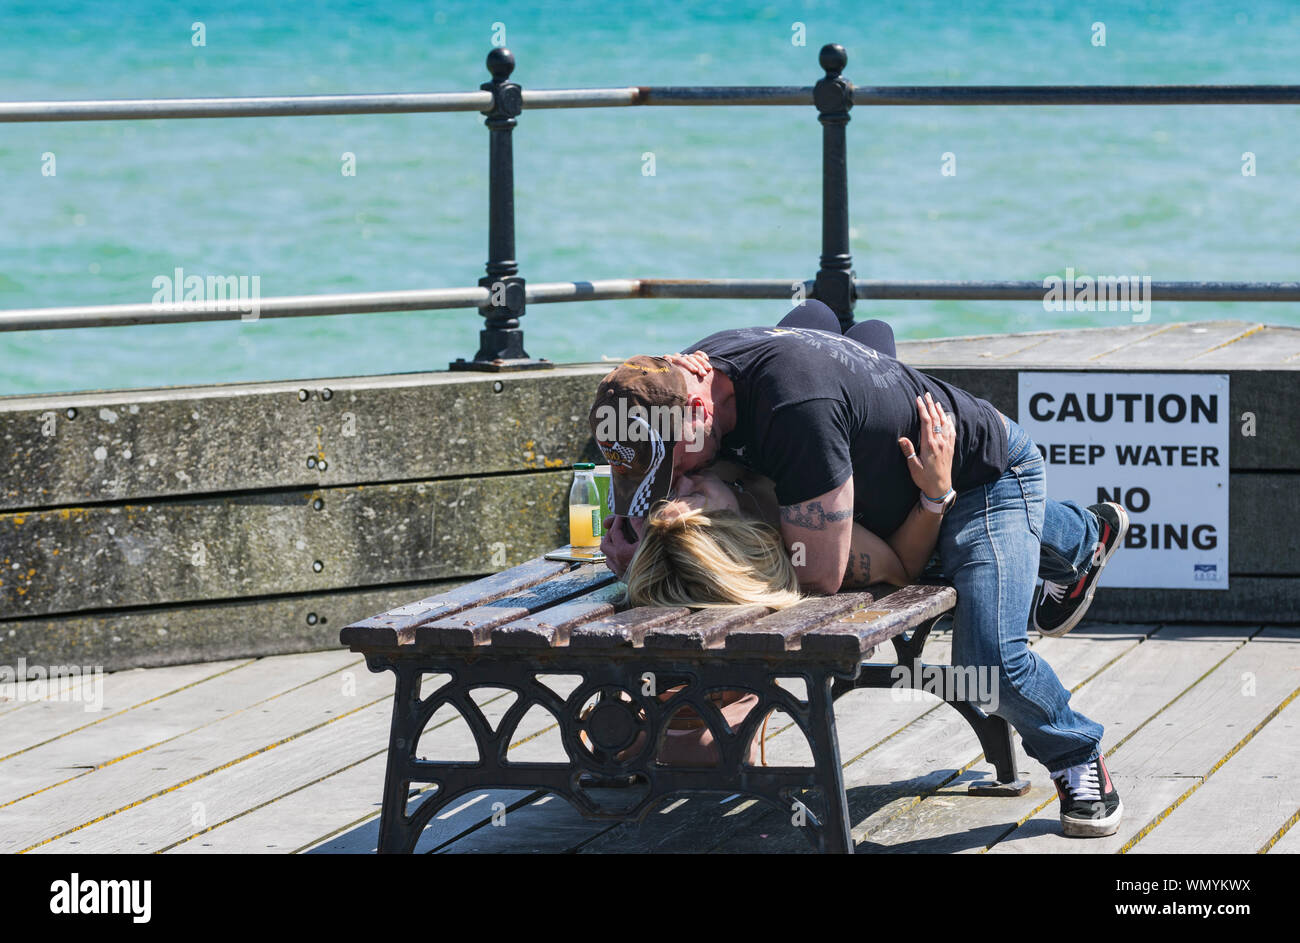 A couple enjoy a cheeky kiss in public on a hot day in Summer in the UK. Stock Photo